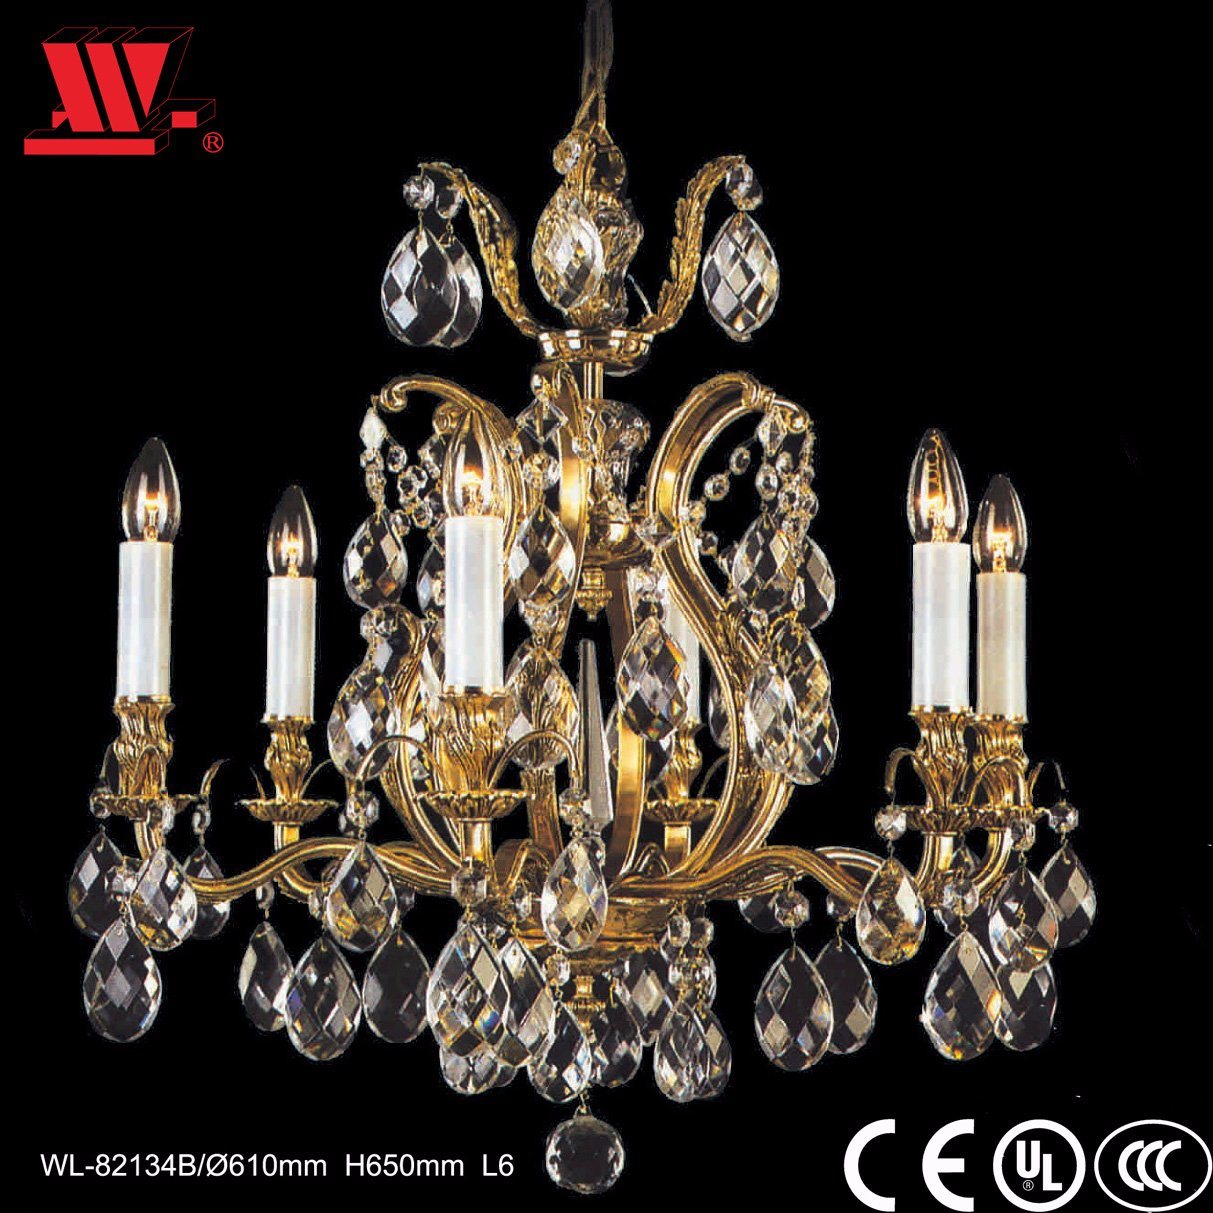 Traditional Crystal Chandelier Wl-82134A